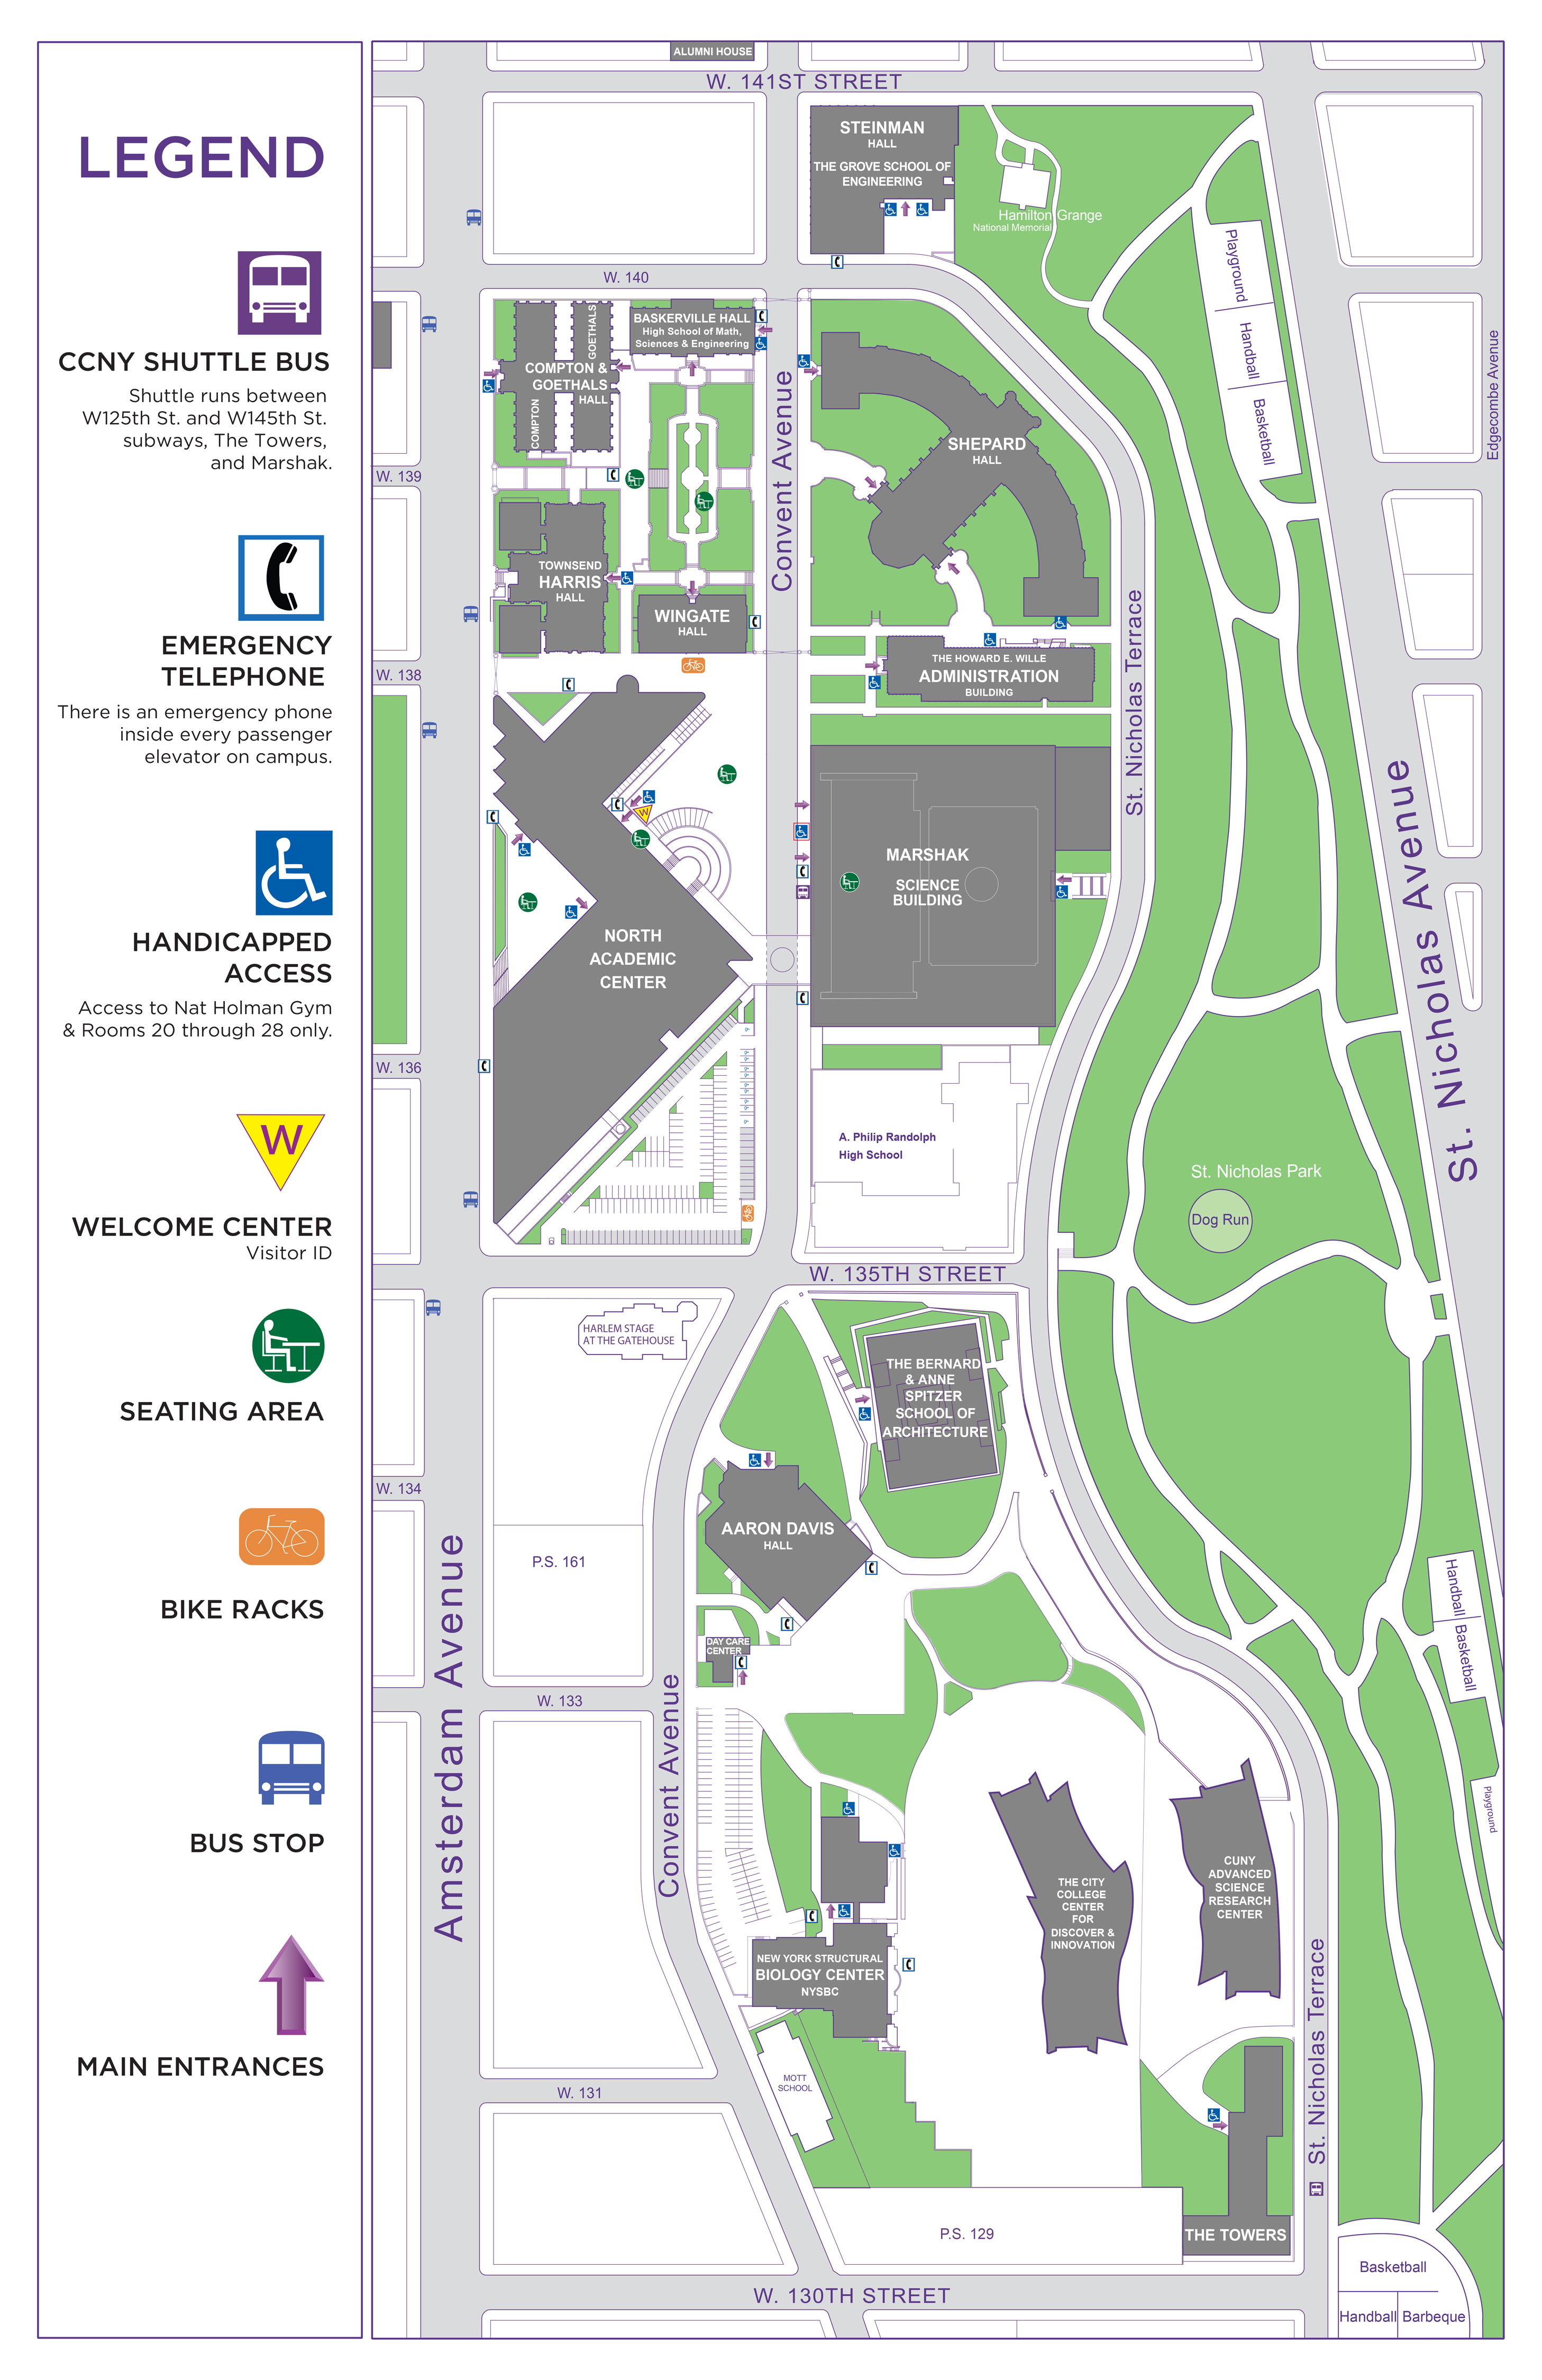 city college campus map Ccny Campus Map The City College Of New York city college campus map